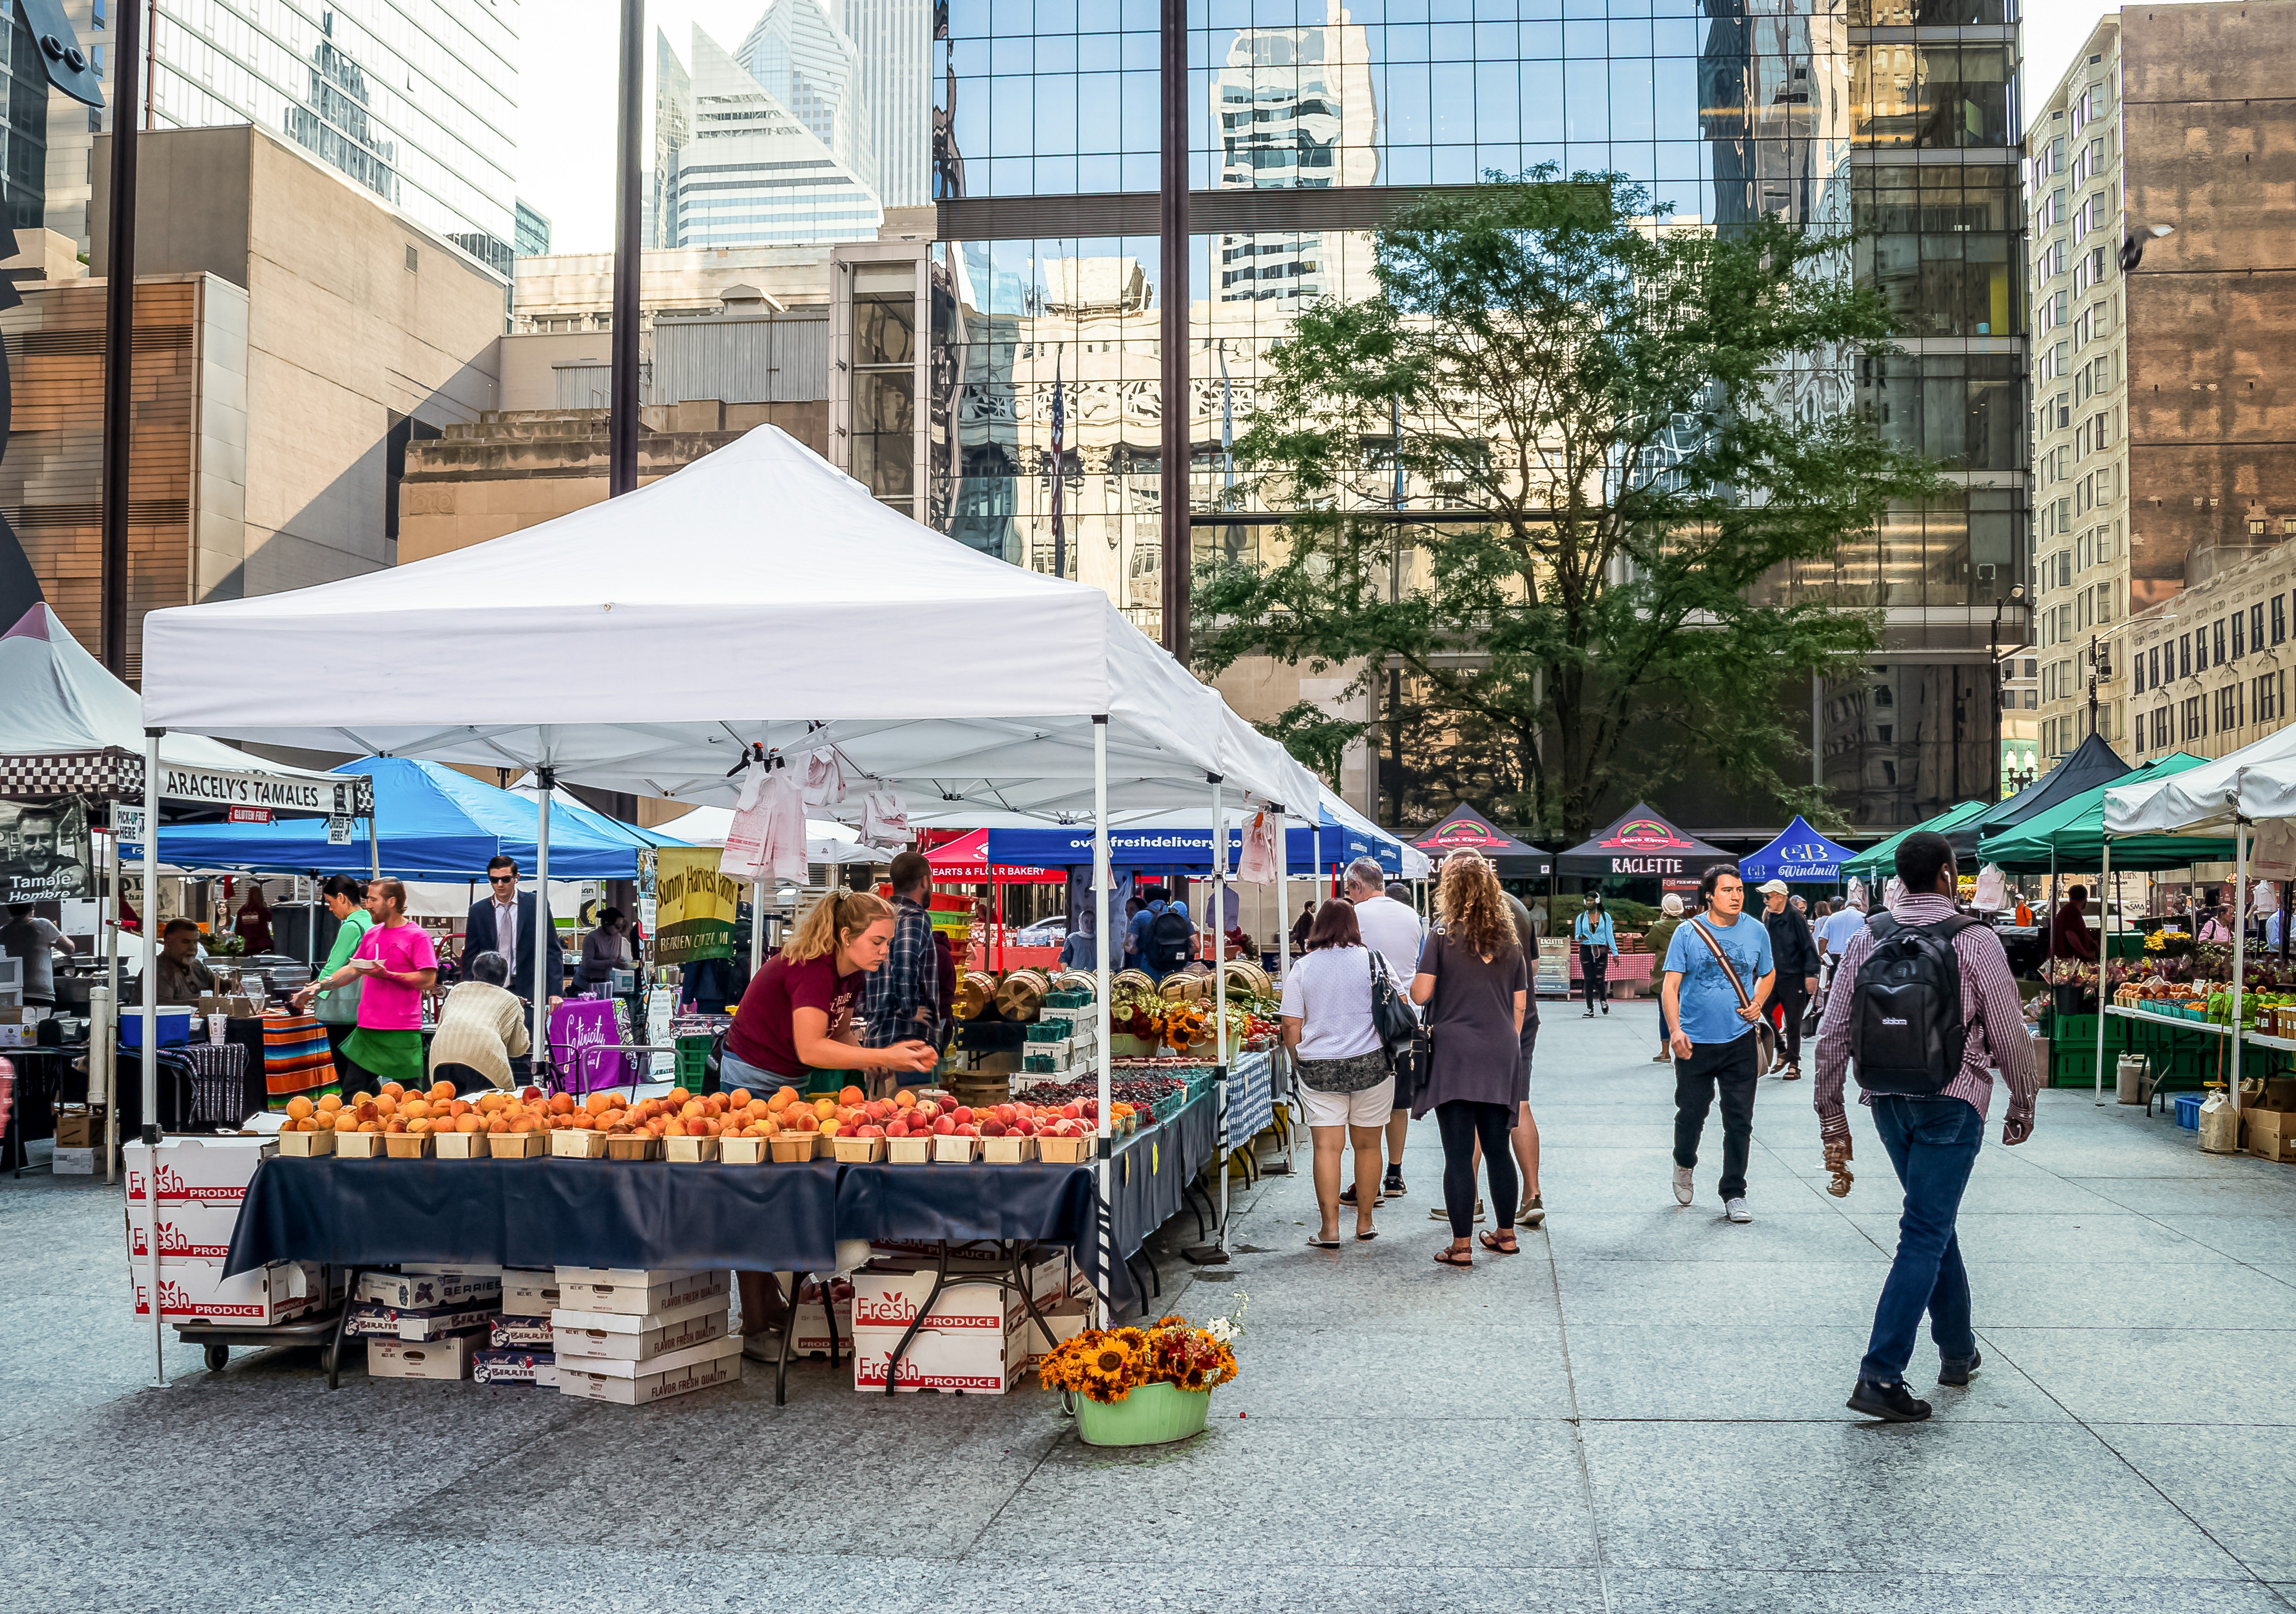 Crowds of people browse the Chicago farmers market located at Daley Plaza during summer morning